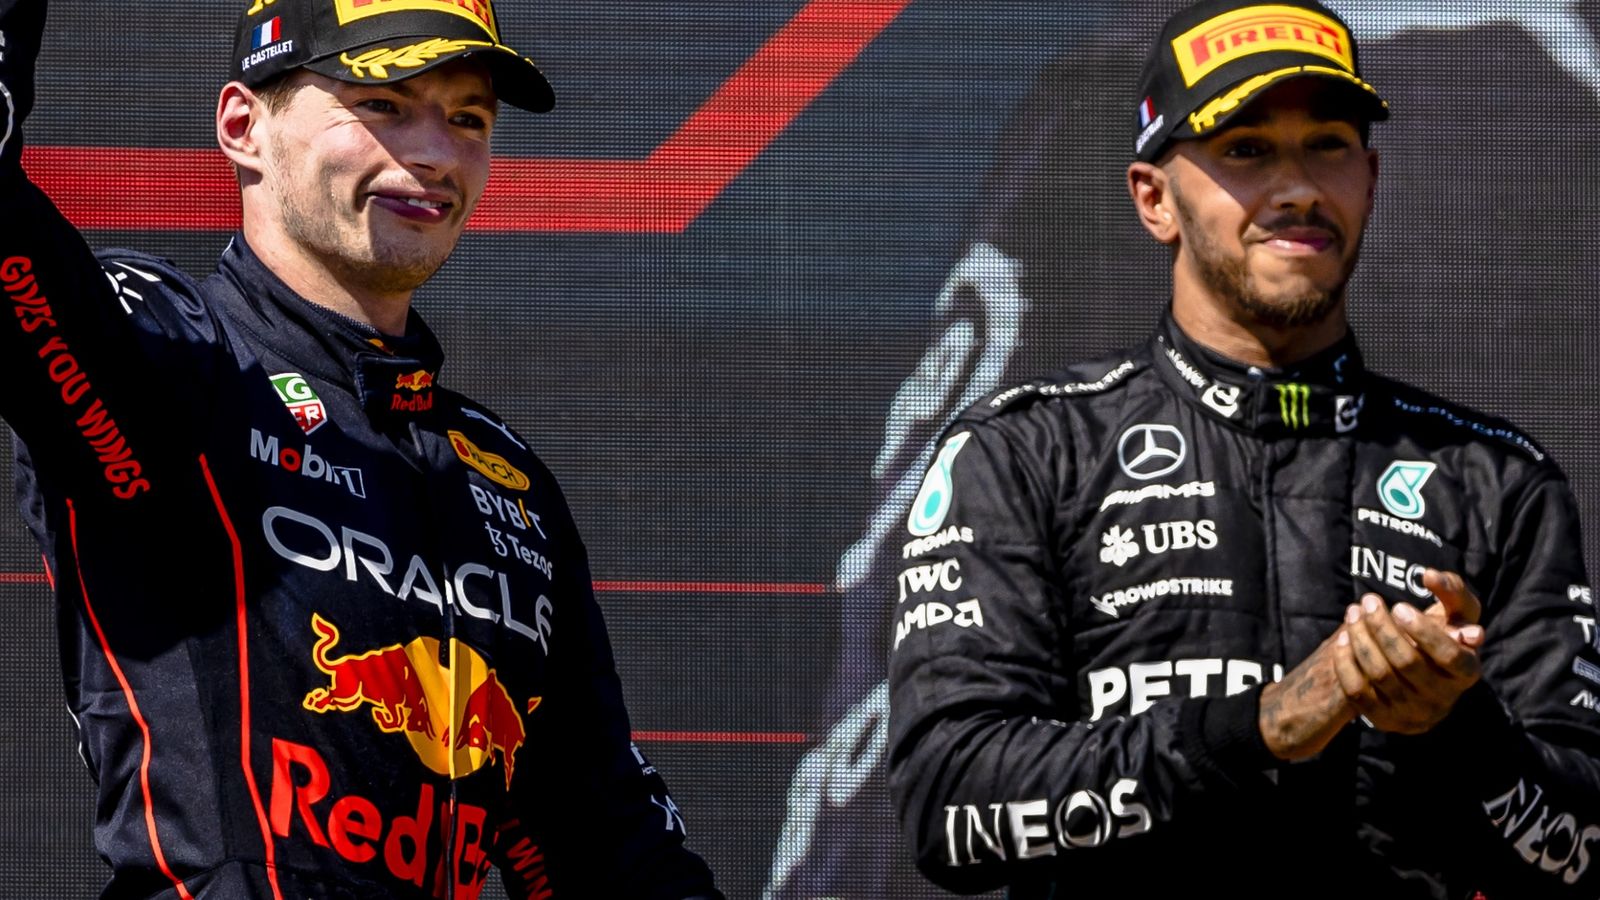 Max Verstappen triumphs in pulsating duel with Lewis Hamilton at French GP, Formula One